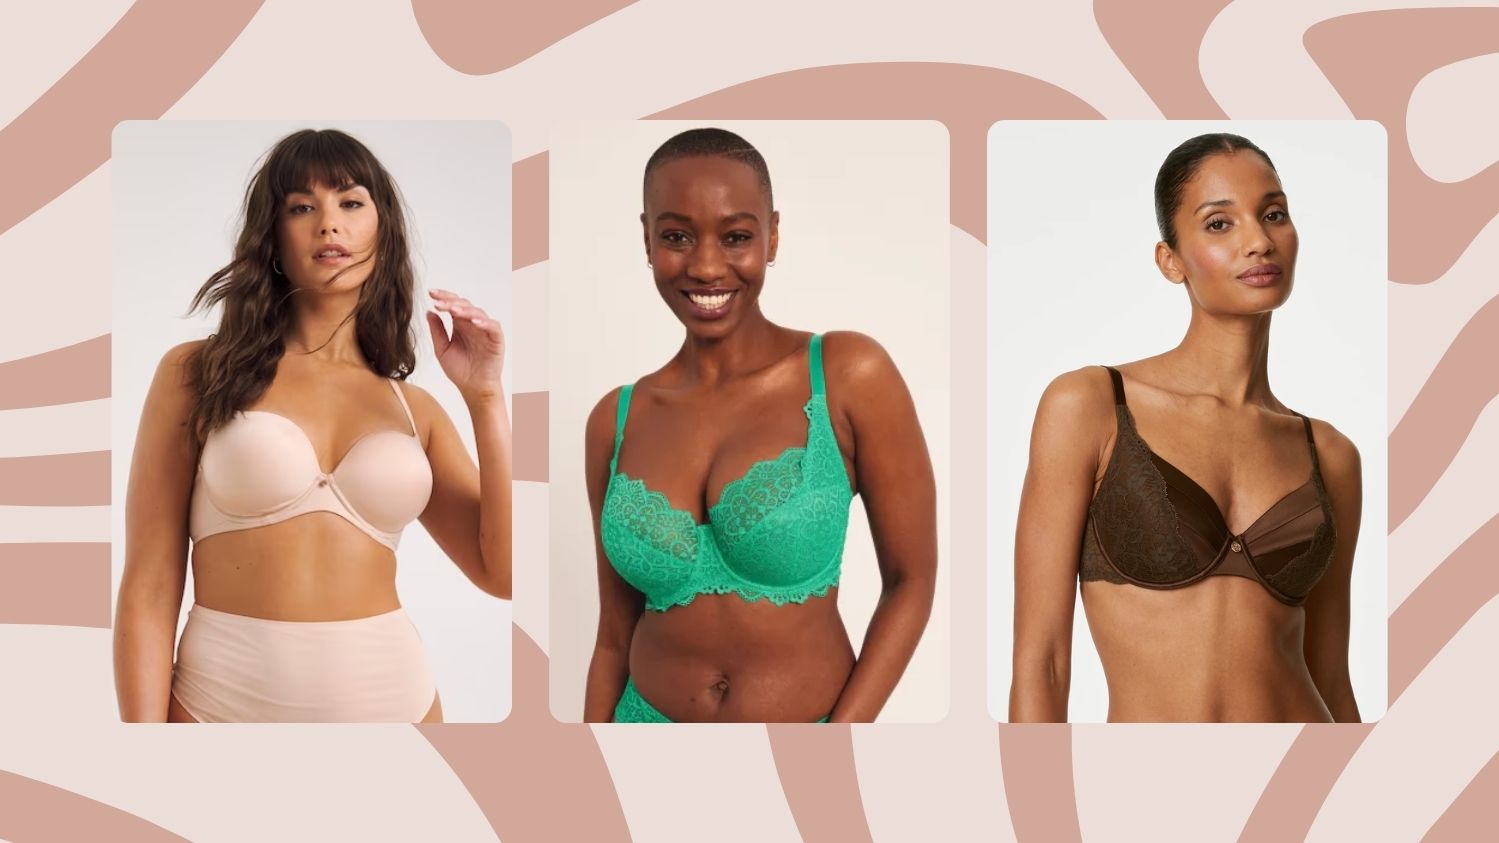 How to Find the Best Bra for Your Breast Shape